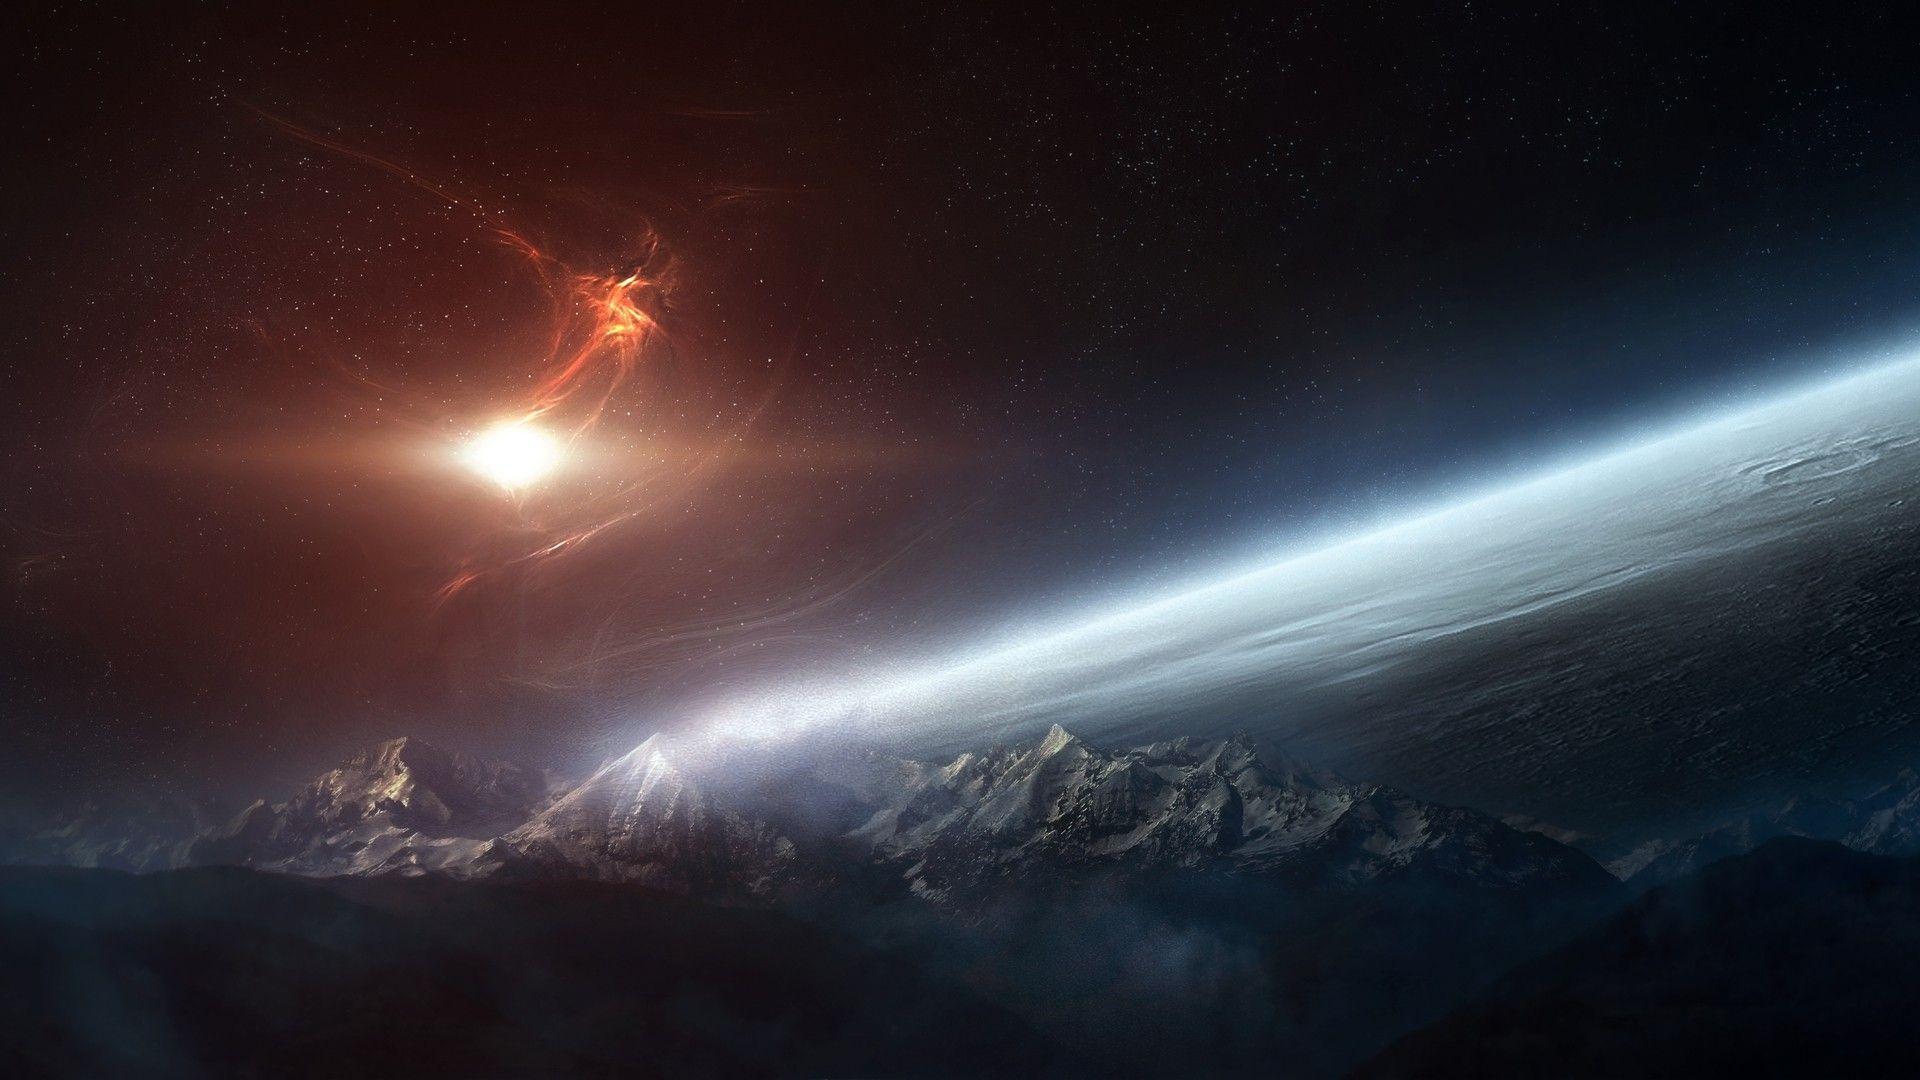 space wallpapers 1920x1080 hd